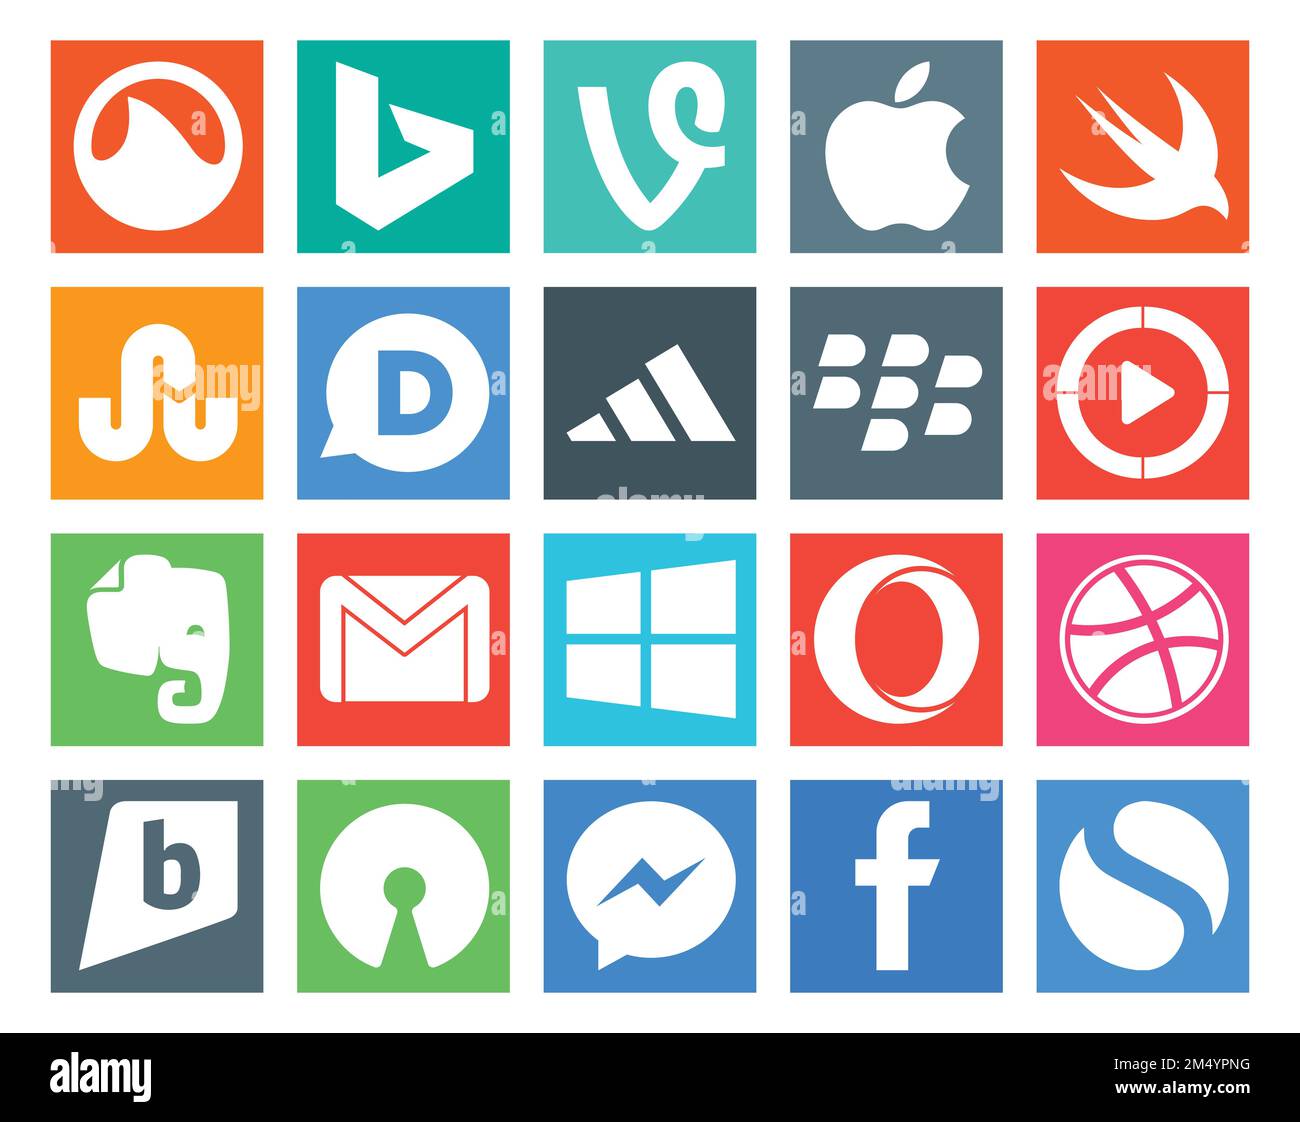 20 Social Media Icon Pack Including dribbble. windows. blackberry. mail. gmail Stock Vector